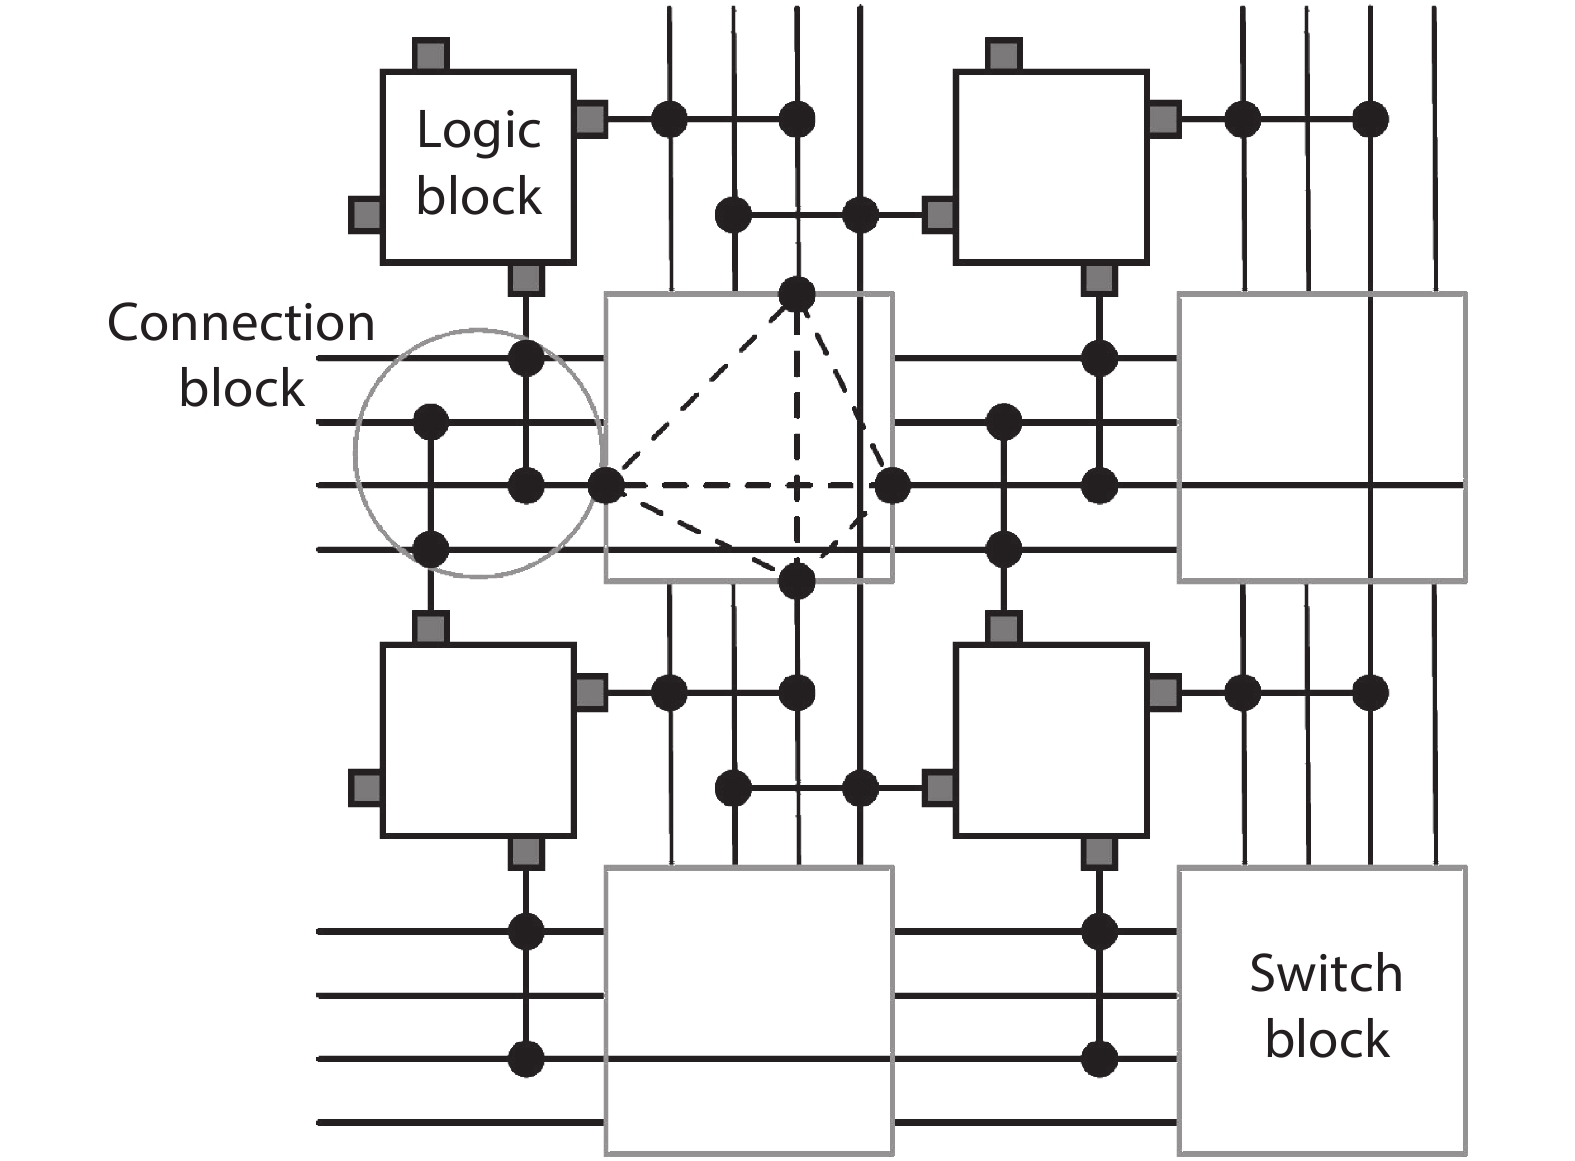 Island-style architecture, which is the base of TM-ARCH with the time-multiplexed interconnects.